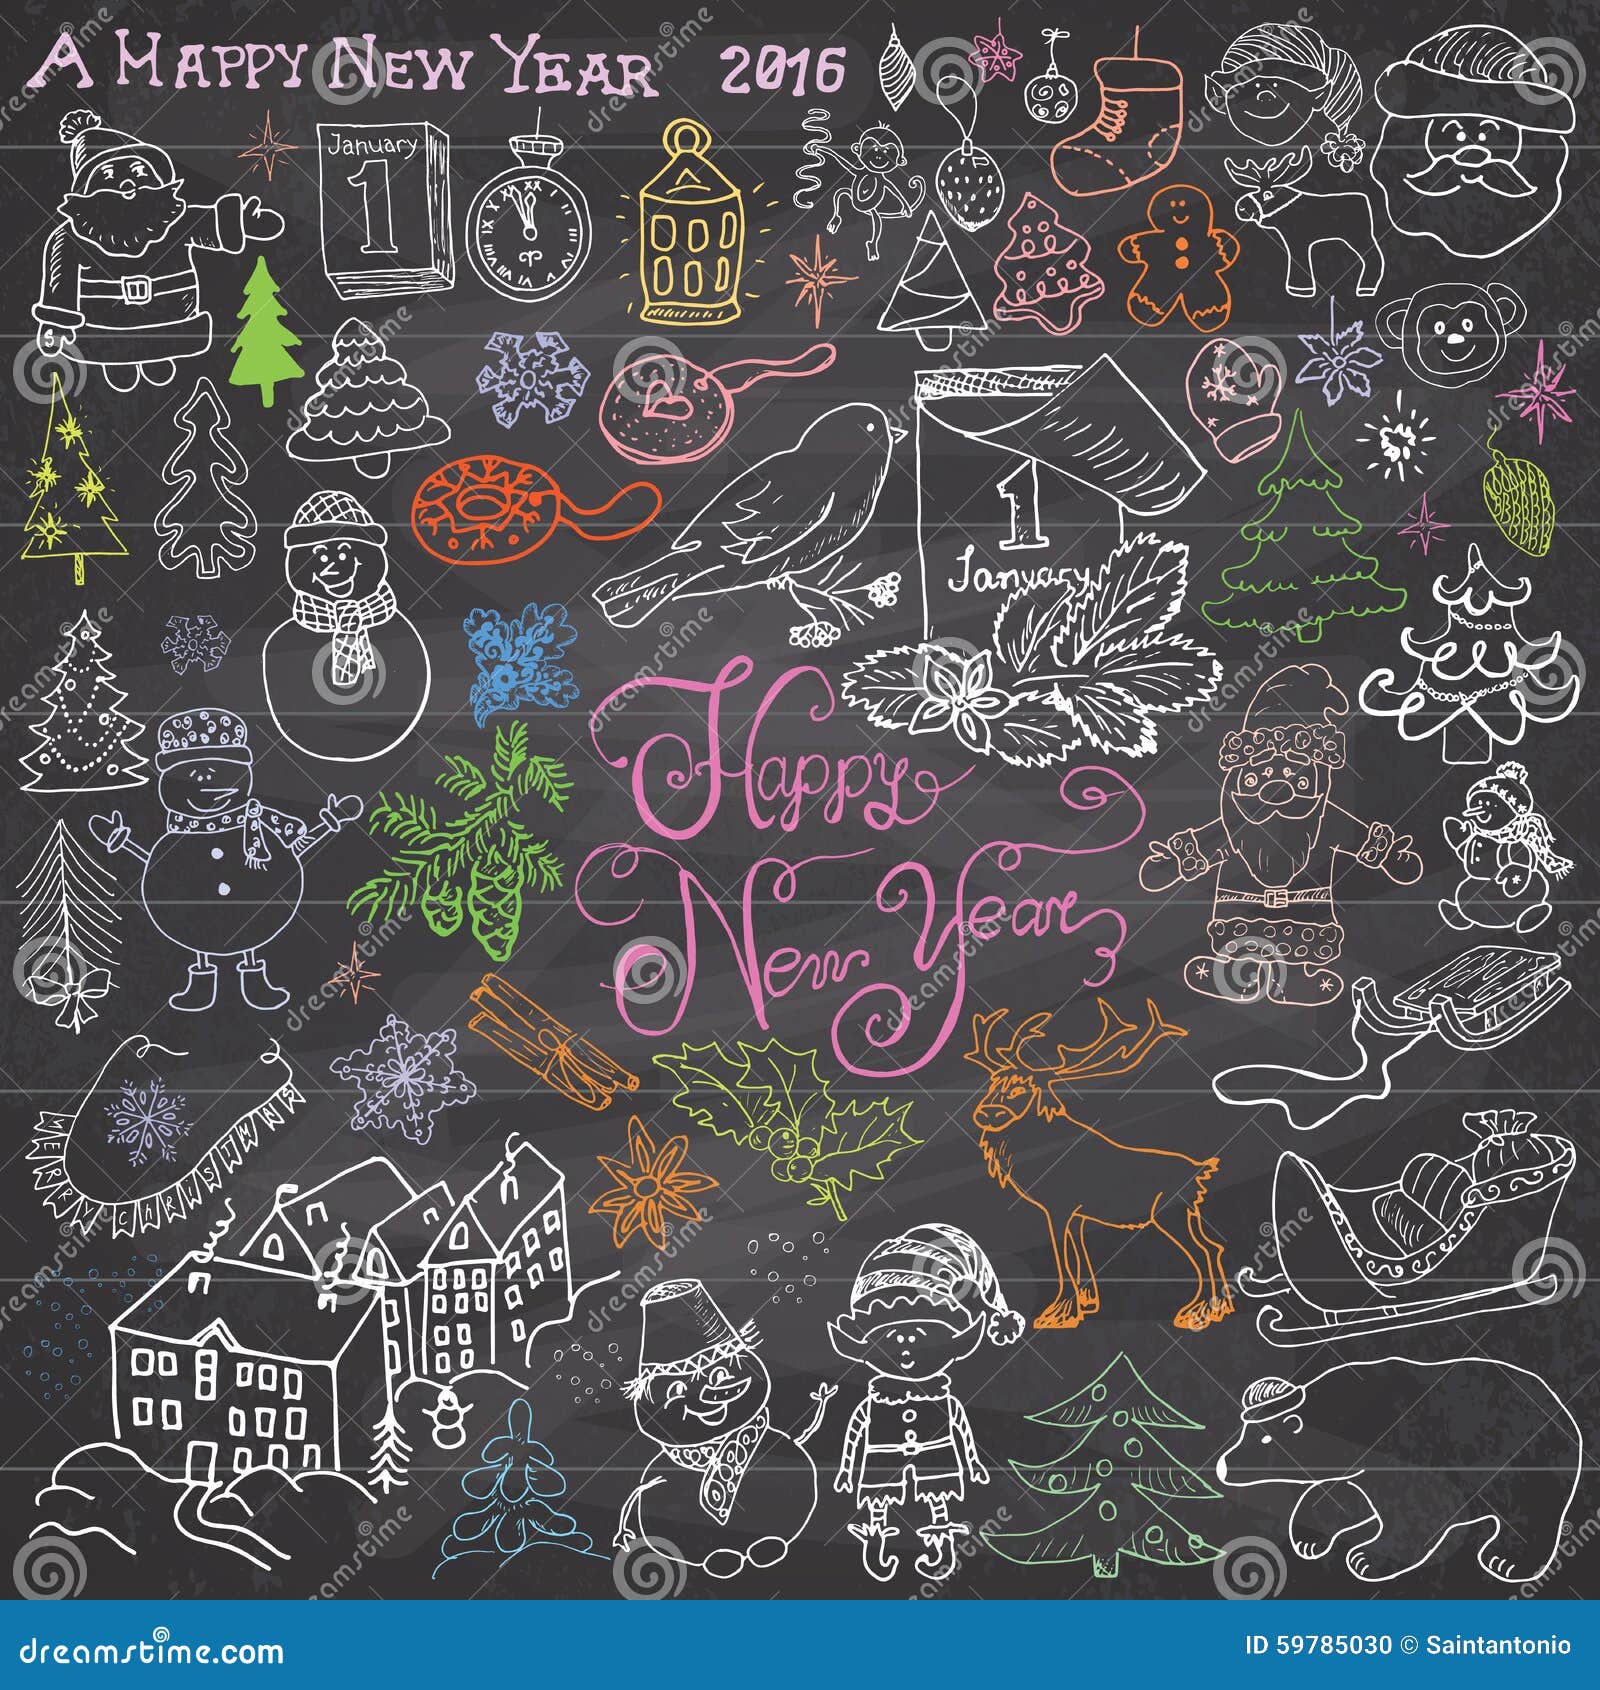 Hand drawn Sketch design of happy new year 2016 Doodles with Lettering set with christmas trees snowflakes snowman elfs deer santa claus and festive